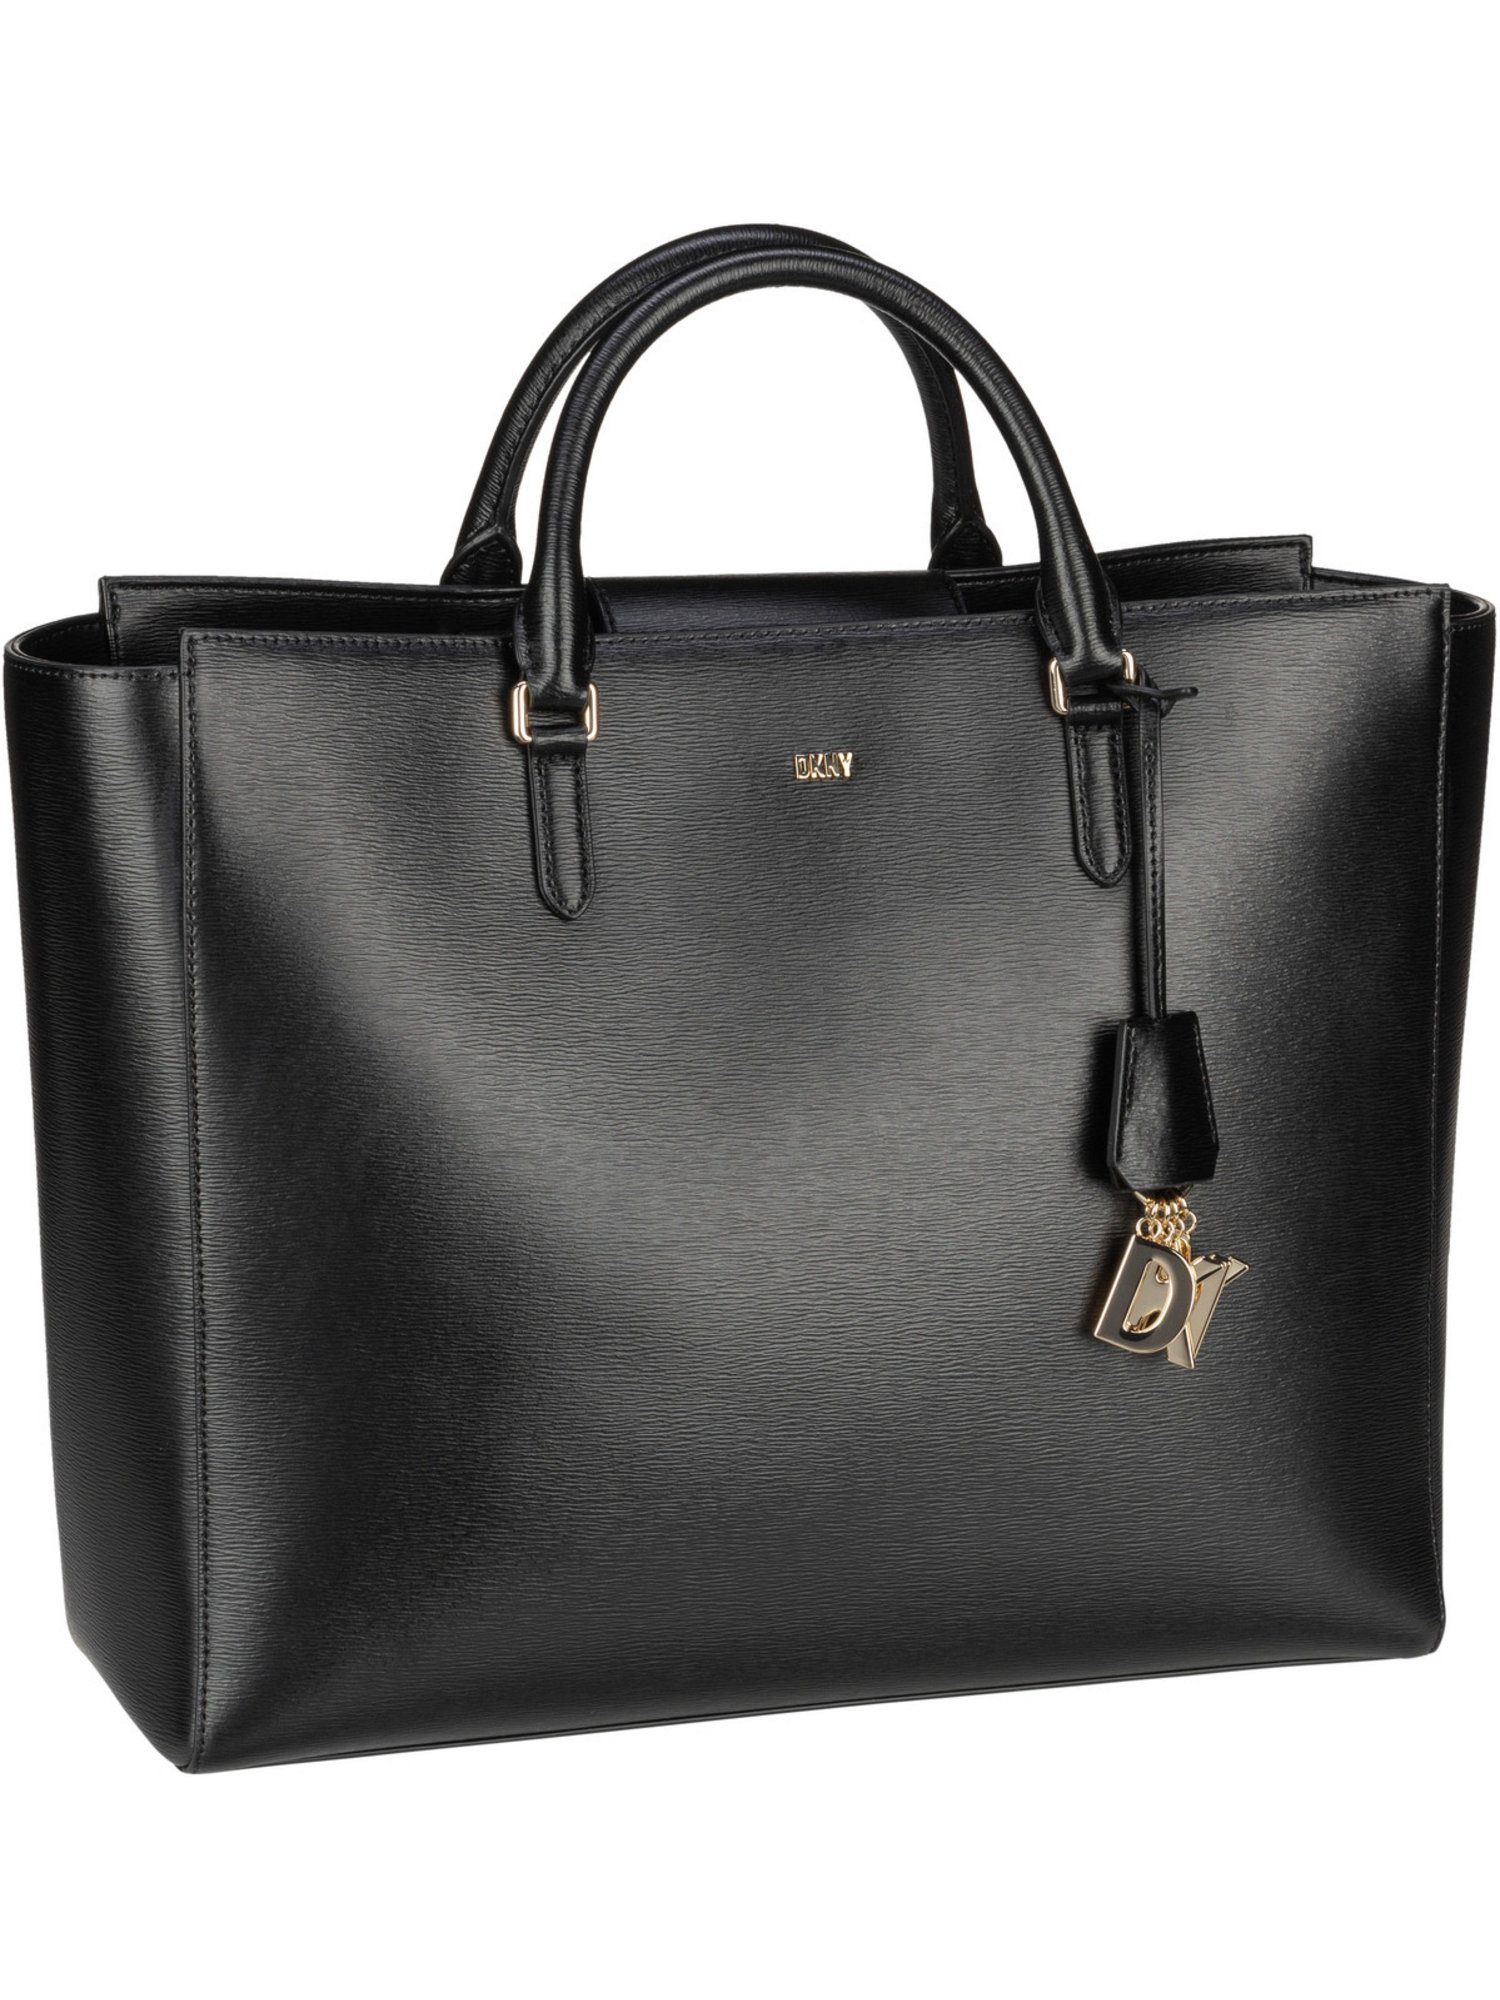 DKNY Shopper Paige Sutton Leather Book Tote